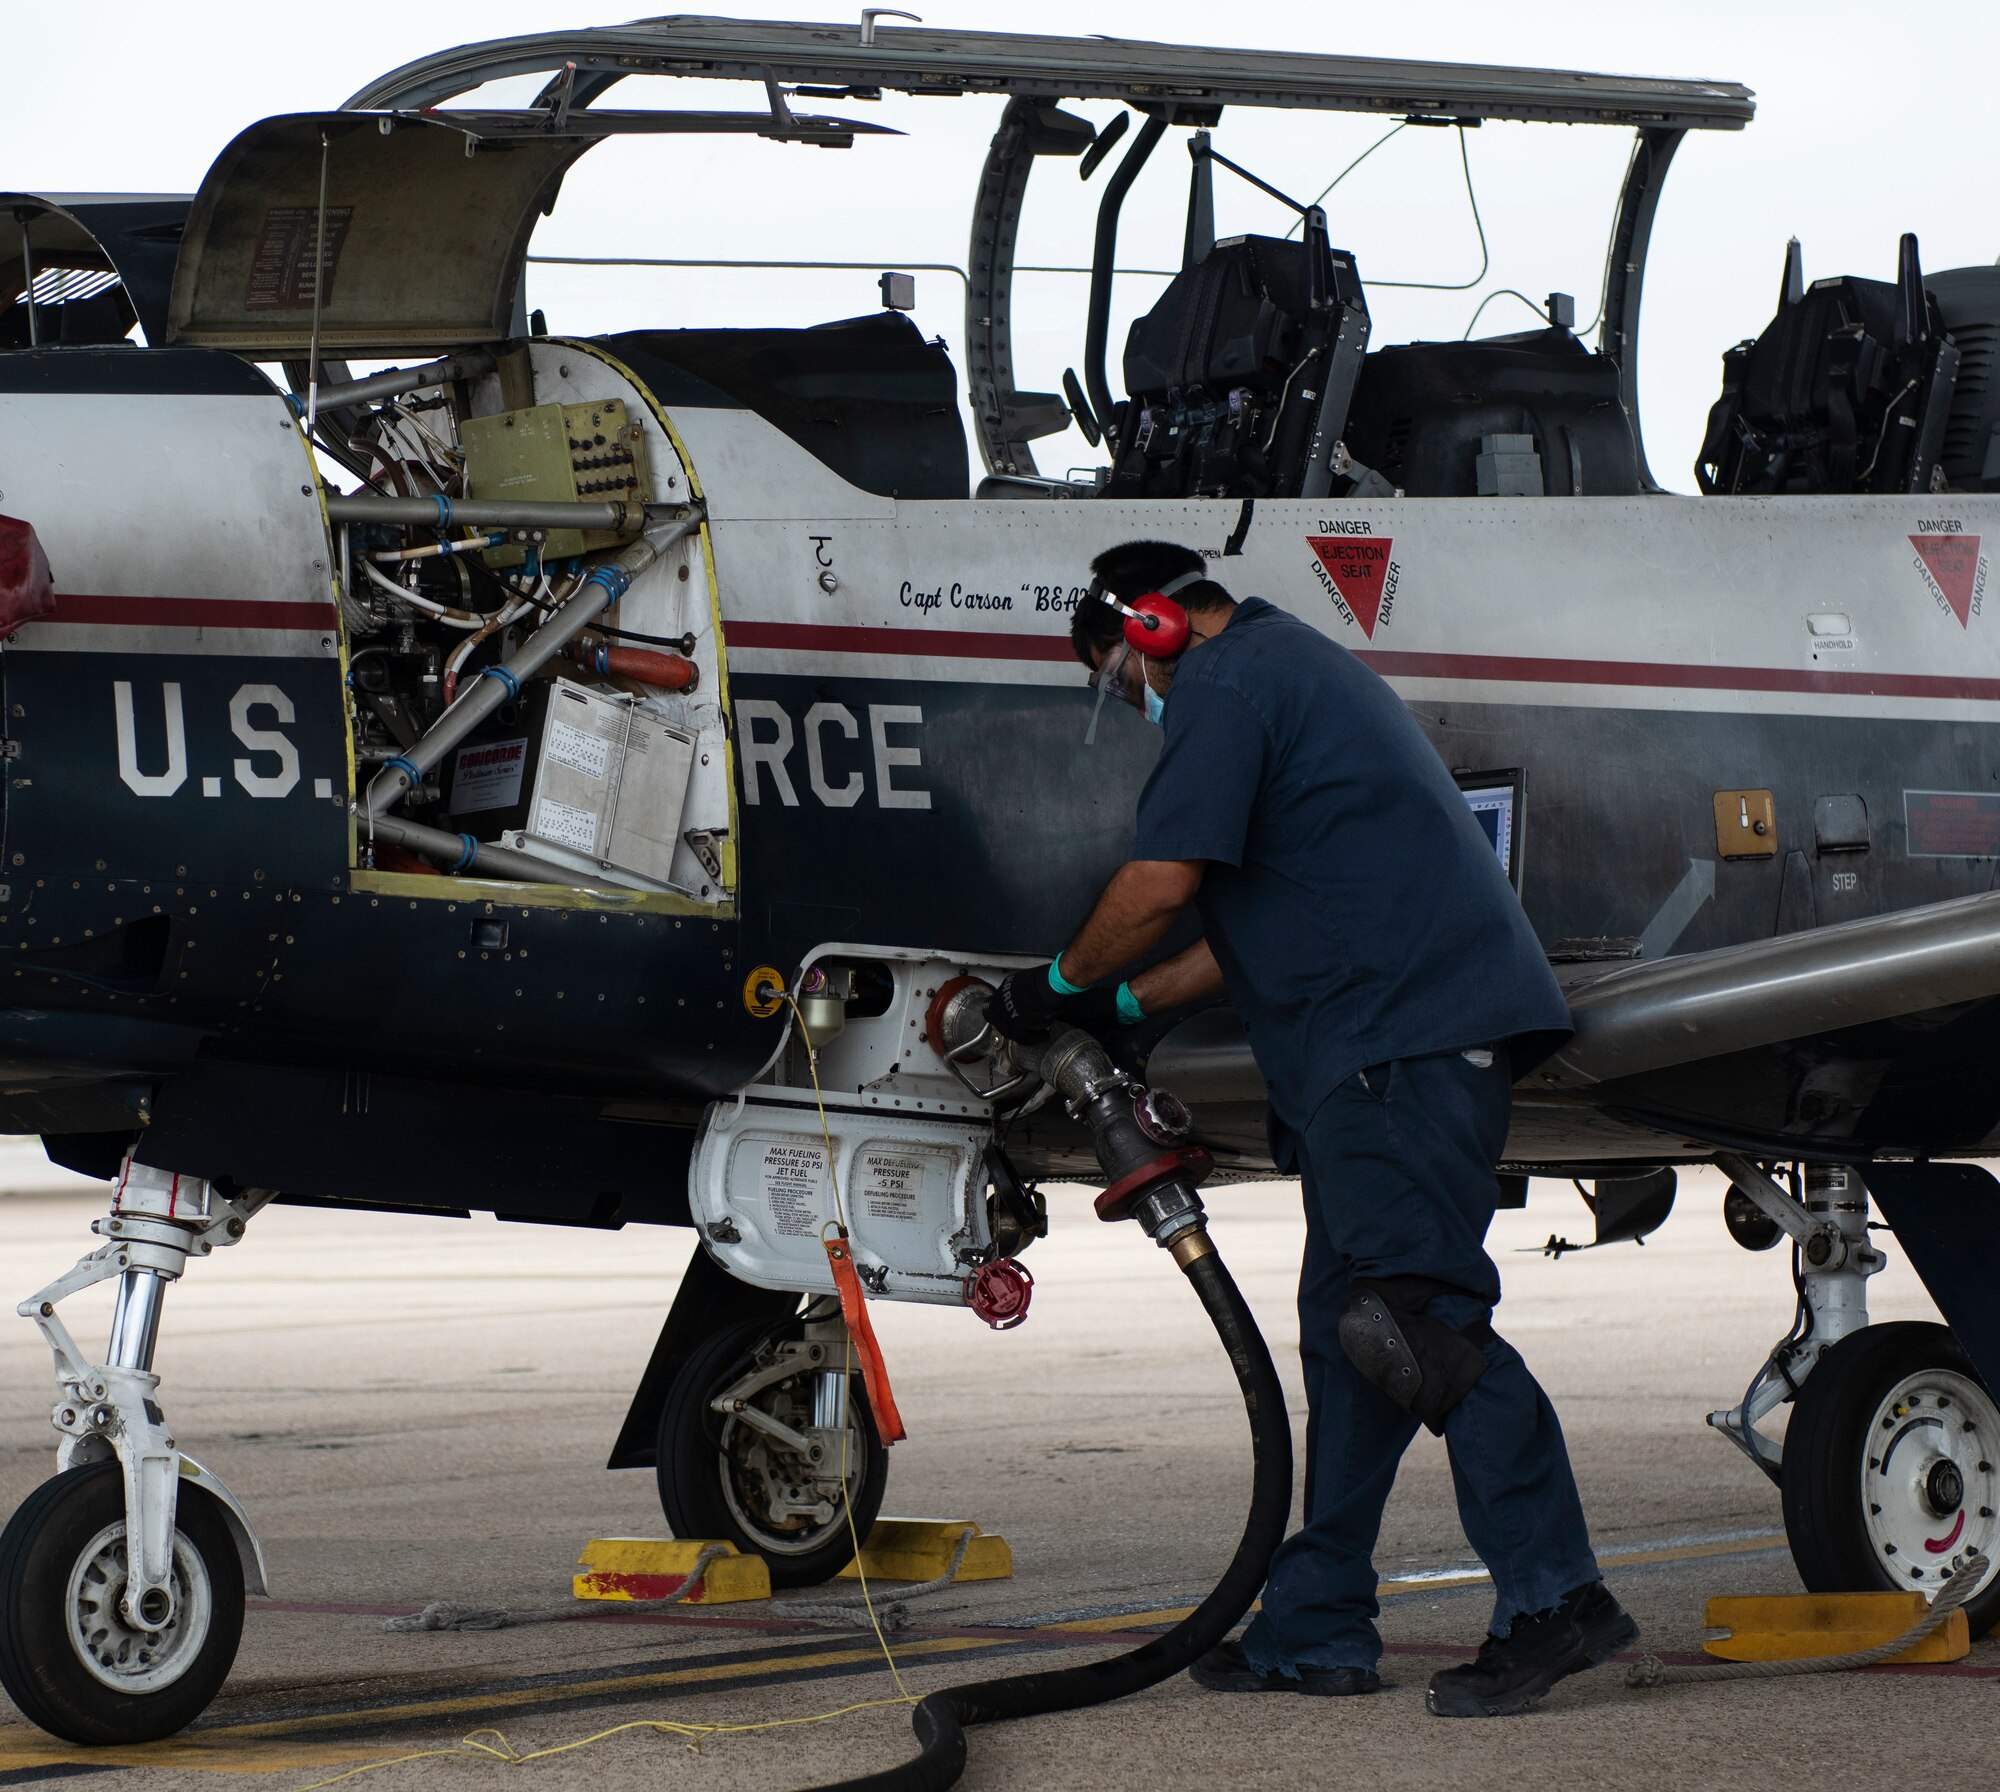 Javier Martinez Jr, 47th Flying Training Wing Maintenance aircraft worker, refuels a Texan T-6 II on the flight line, on Nov. 9 2020, Laughlin Air Force Base, Texas. He is utilizing the new commercial 3K refueler vehicle that is being tested. (U.S. Air Force photo by Airman 1st Class David Phaff)